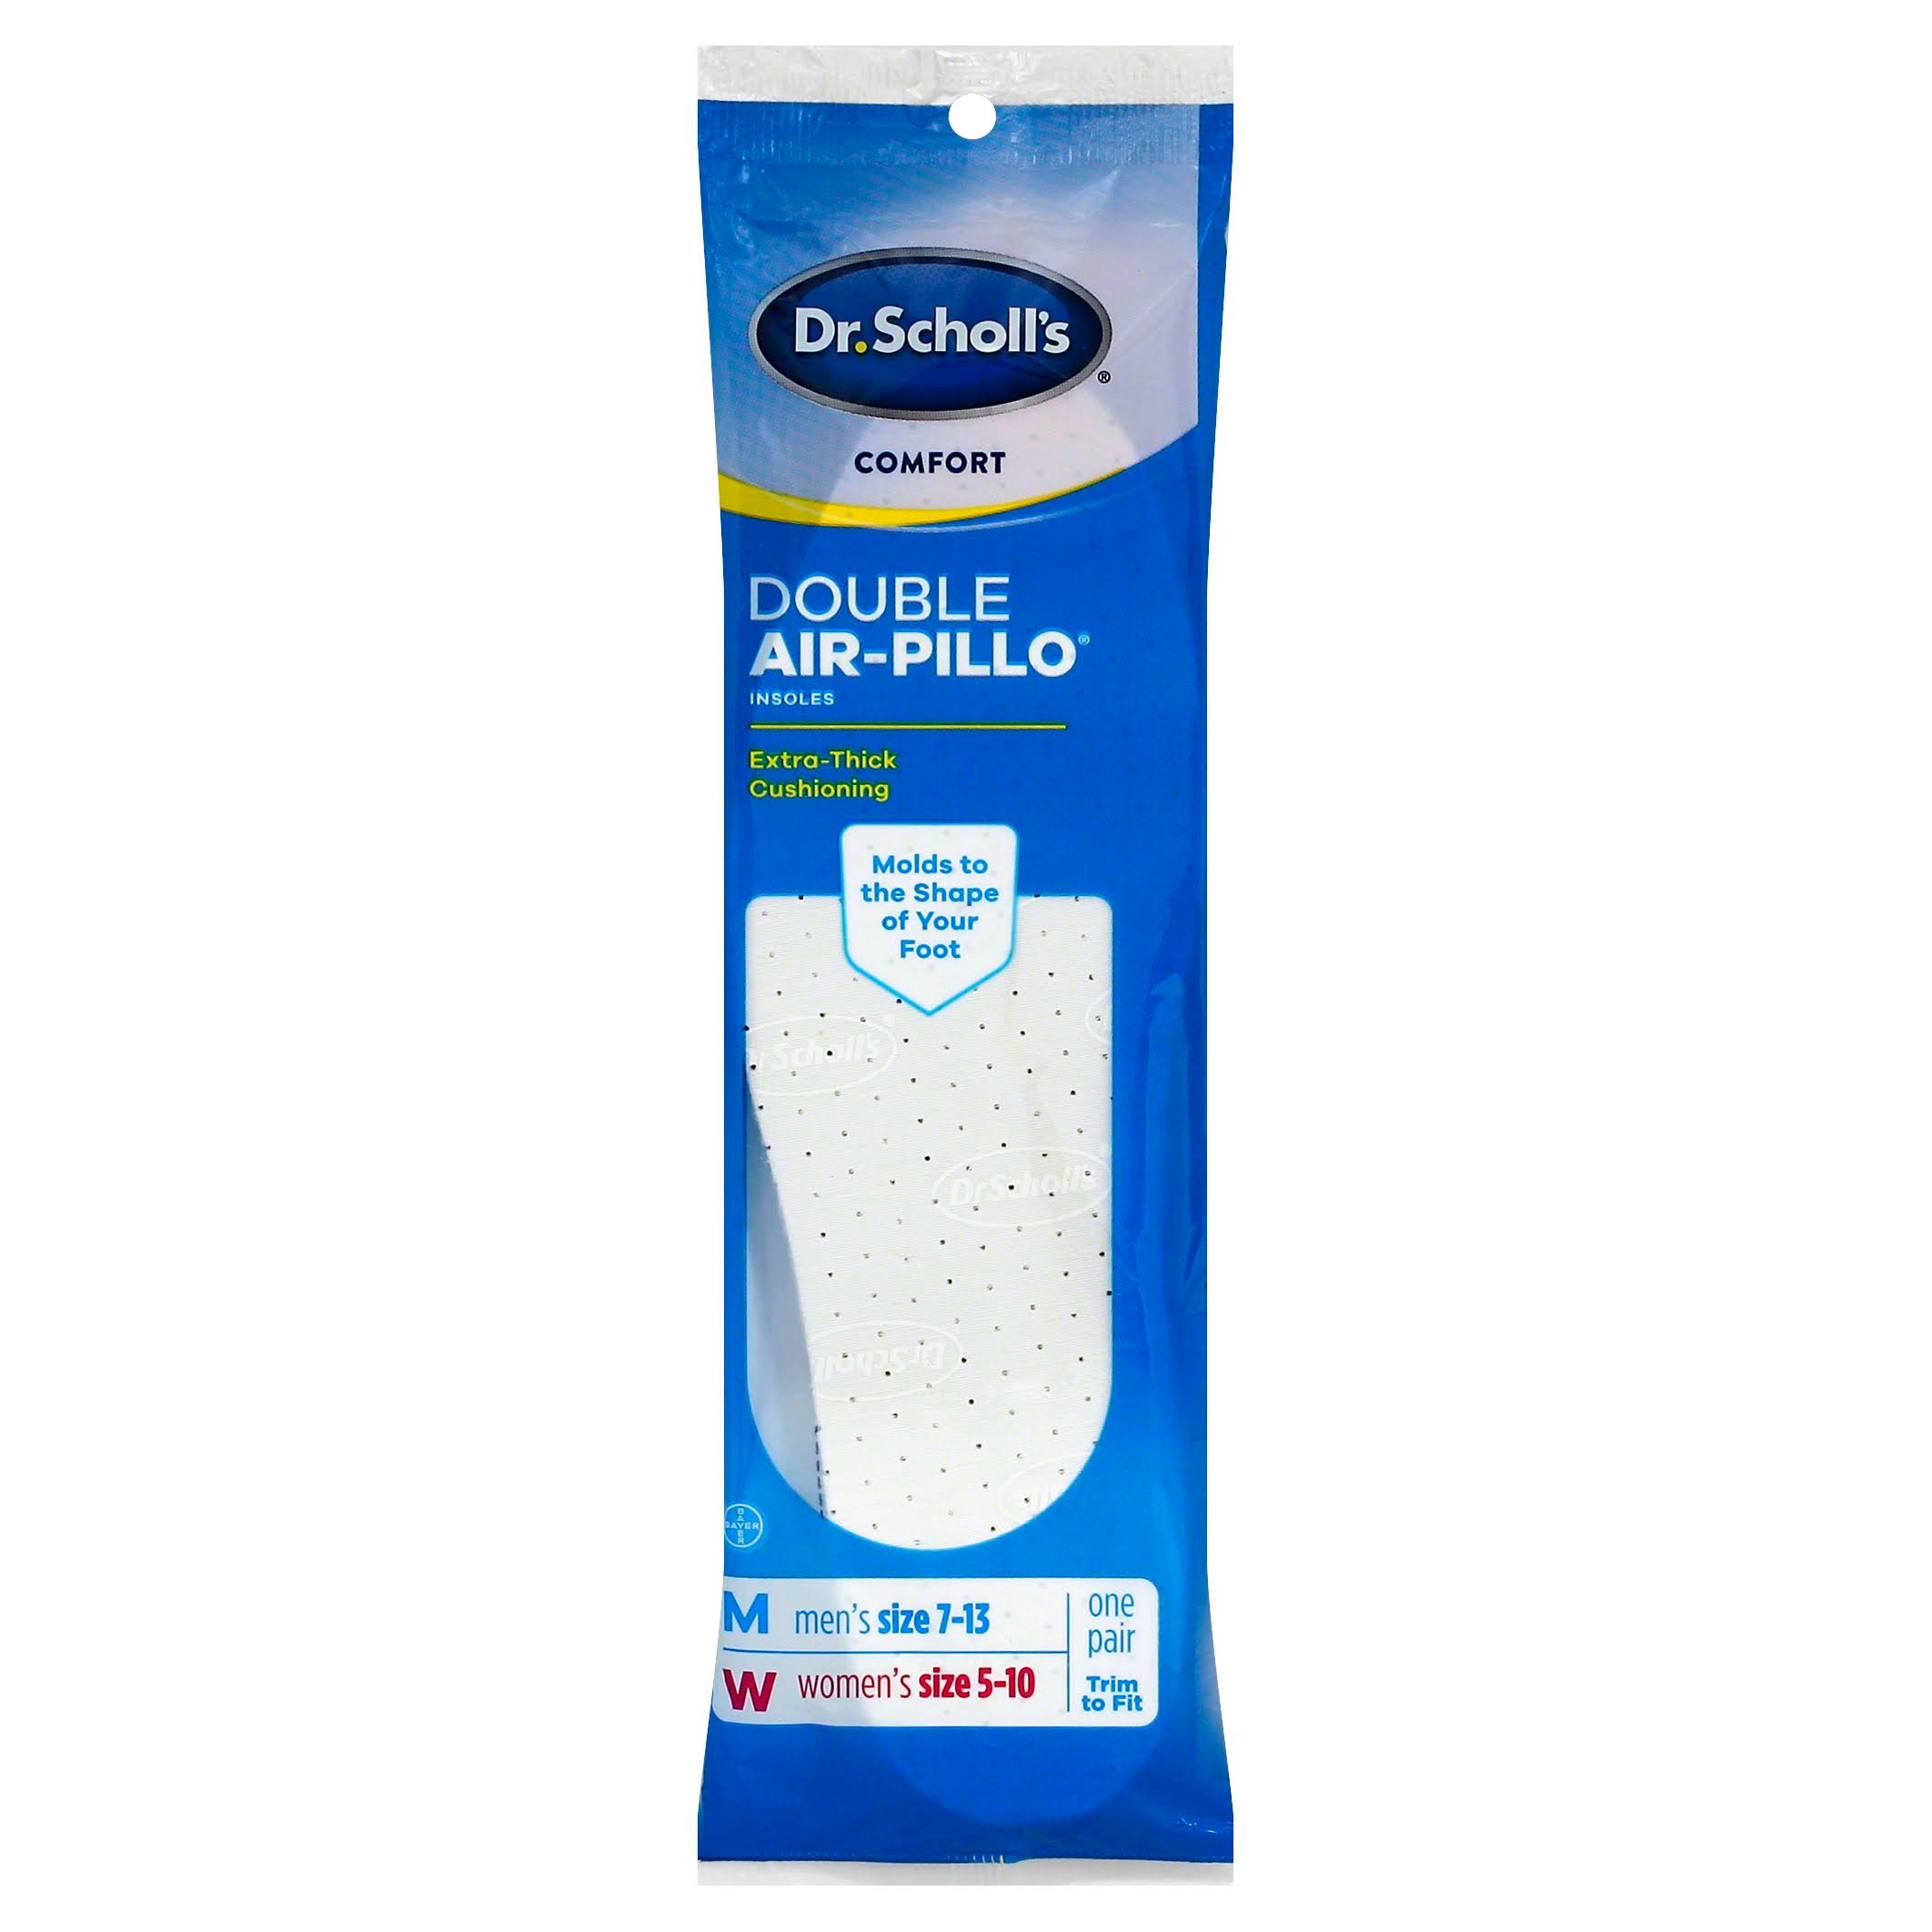 Dr Scholls Comfort Double Air Pillo Insoles - 7 to 13 USM, 5 to 10 USW